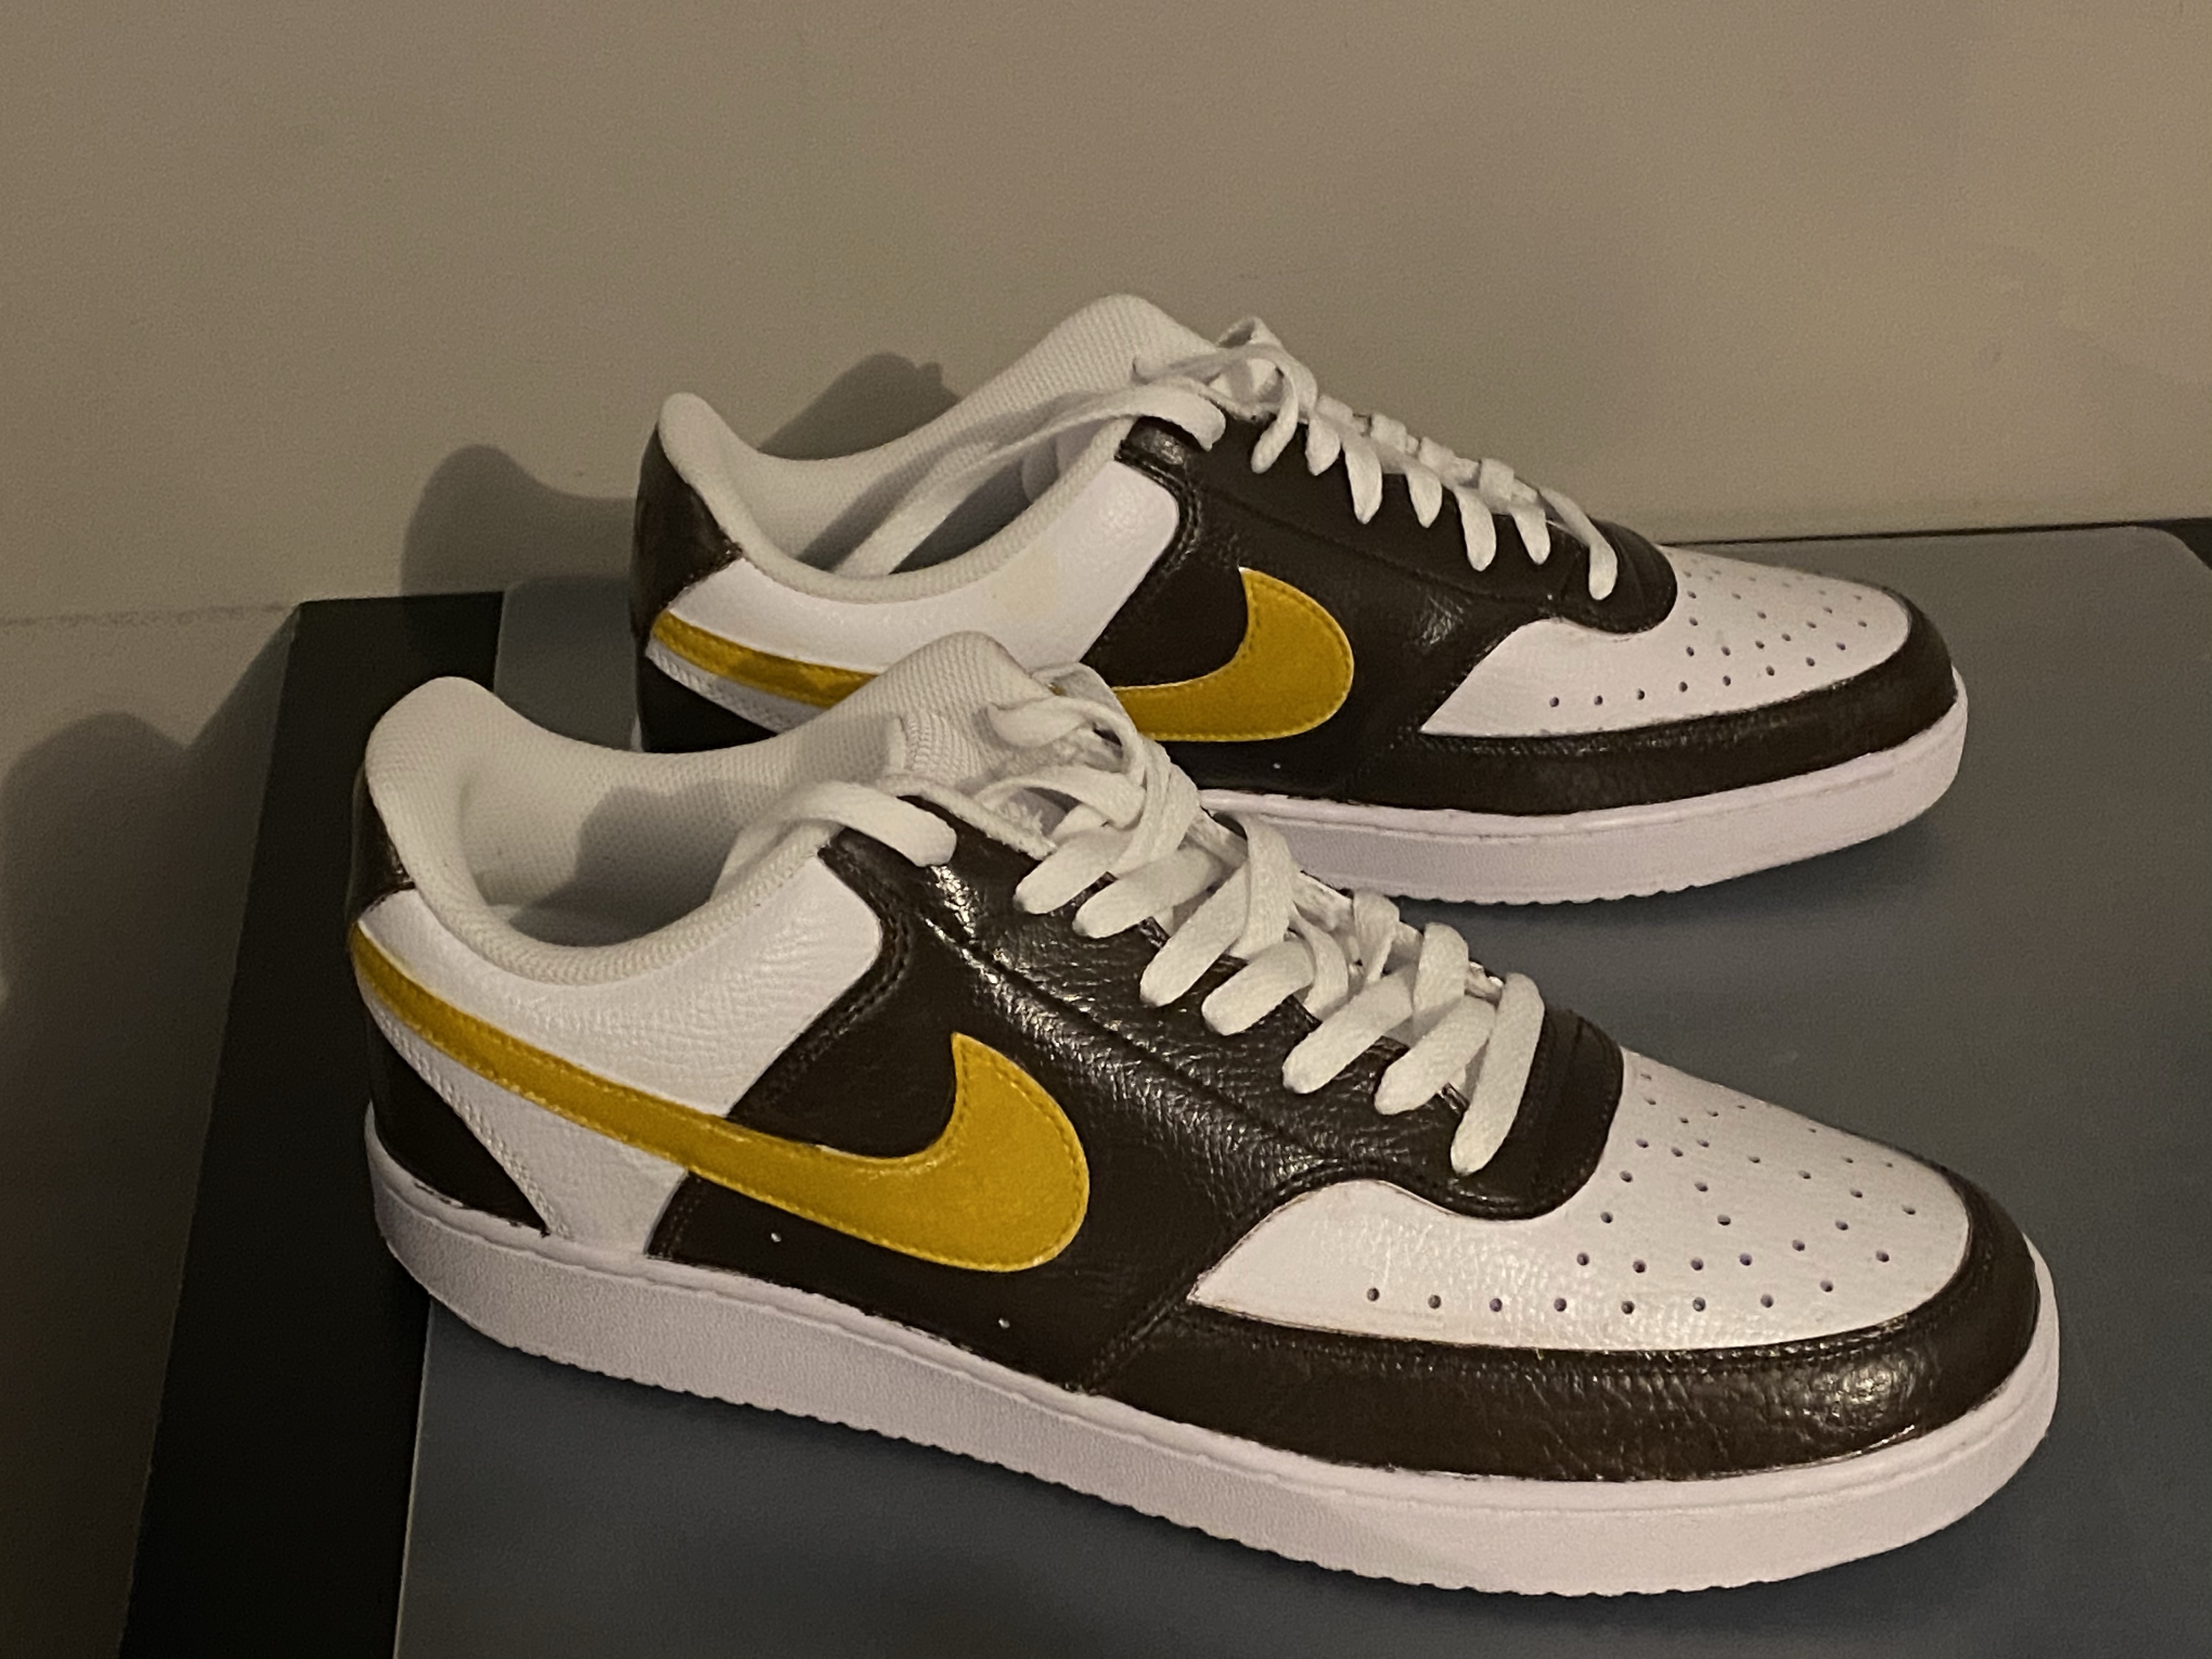 Custom Sneaks: Finished and They Look Good